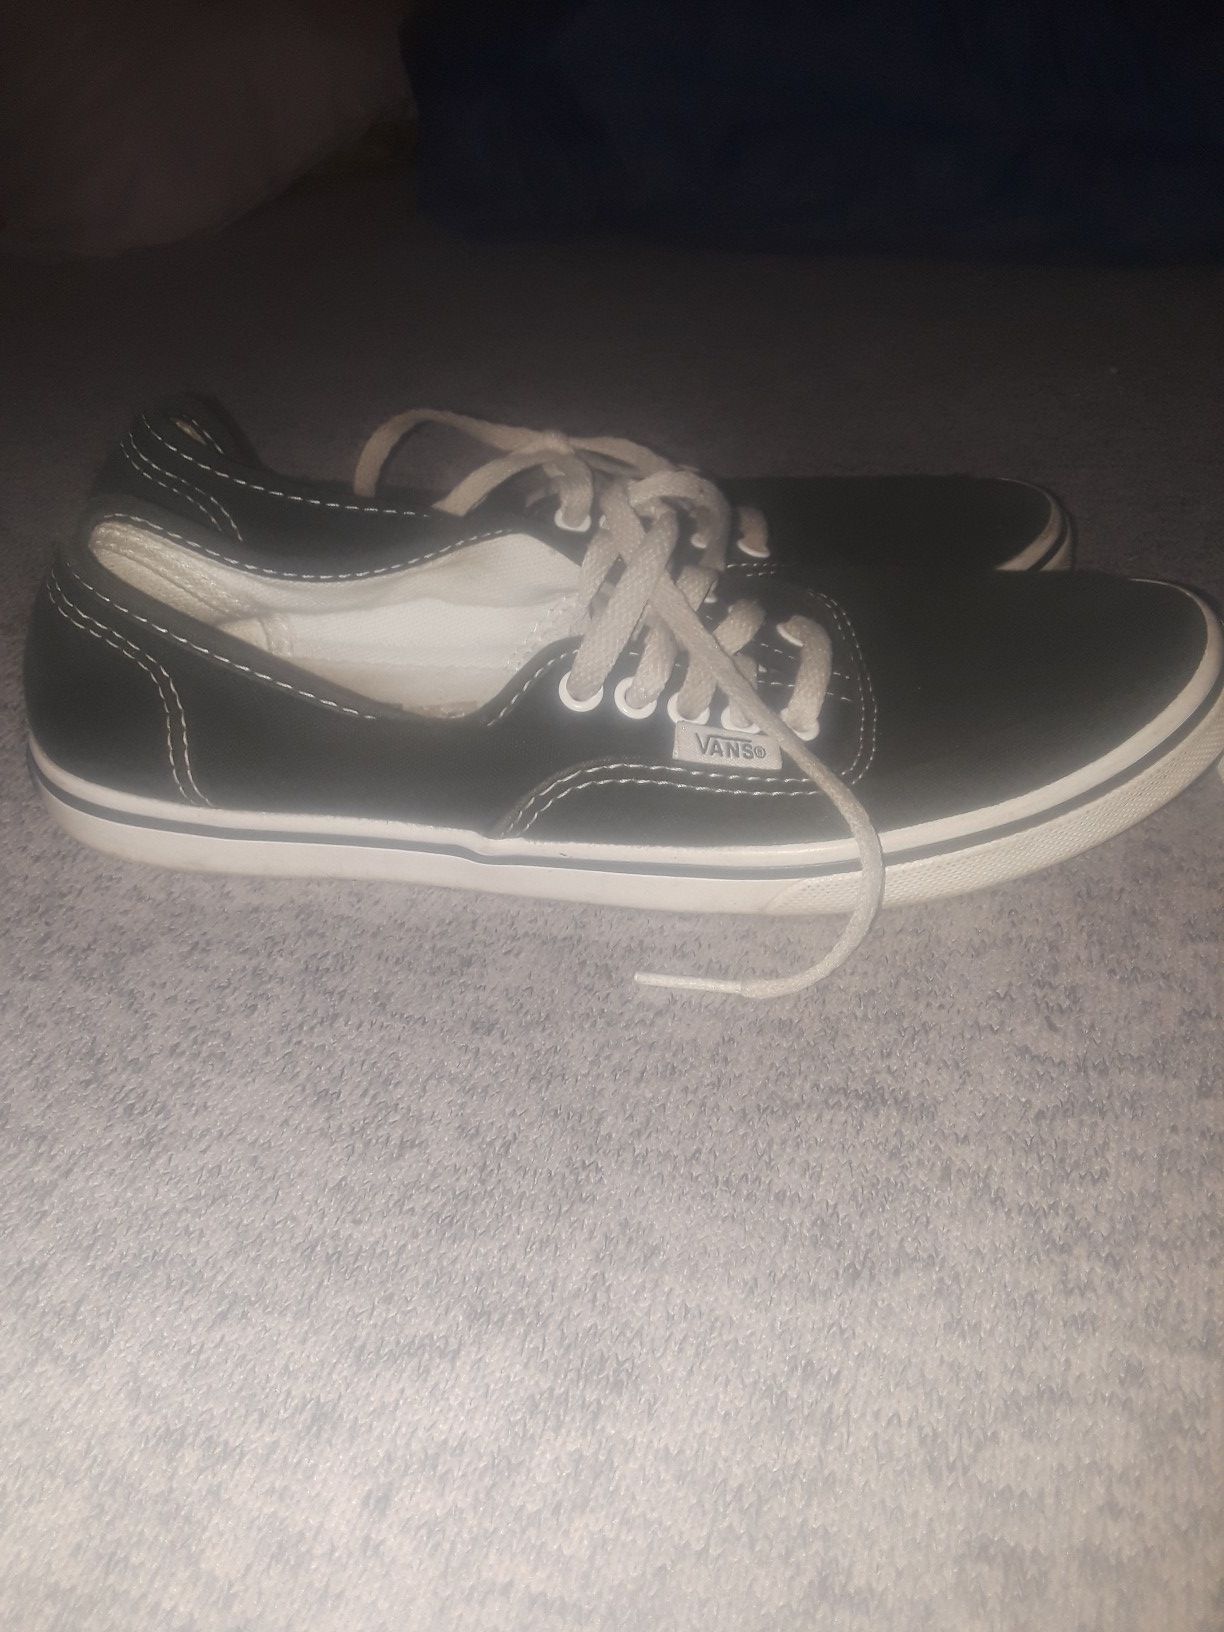 2 pair of Van's black size 41/2 and blue a d brown size 4